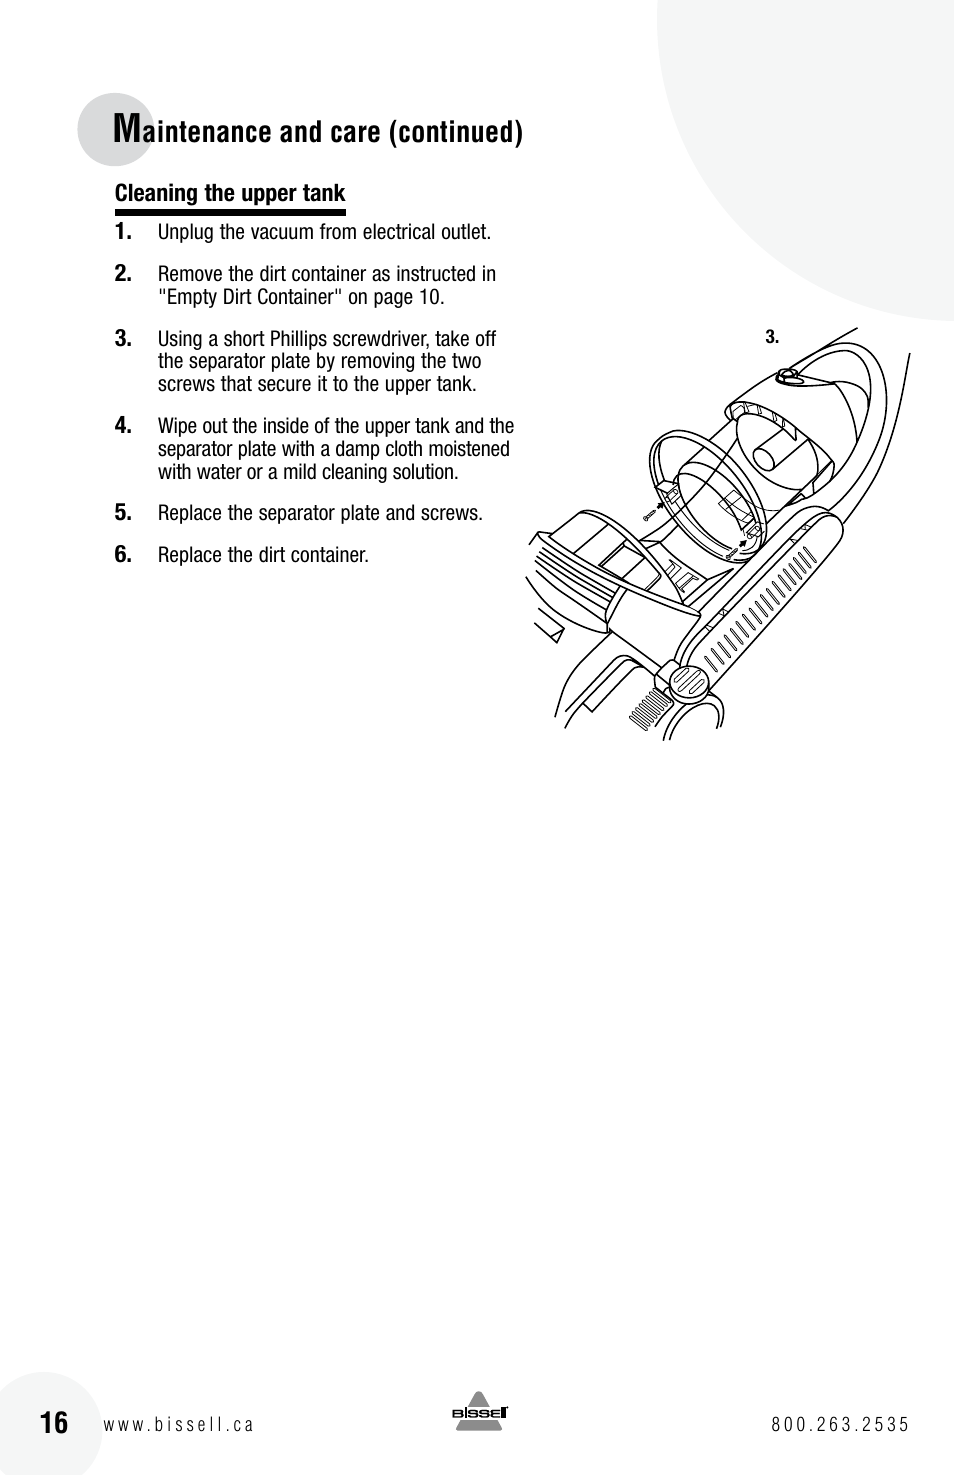 Aintenance and care (continued) | Bissell 6 3 9 0 User Manual | Page 16 / 20